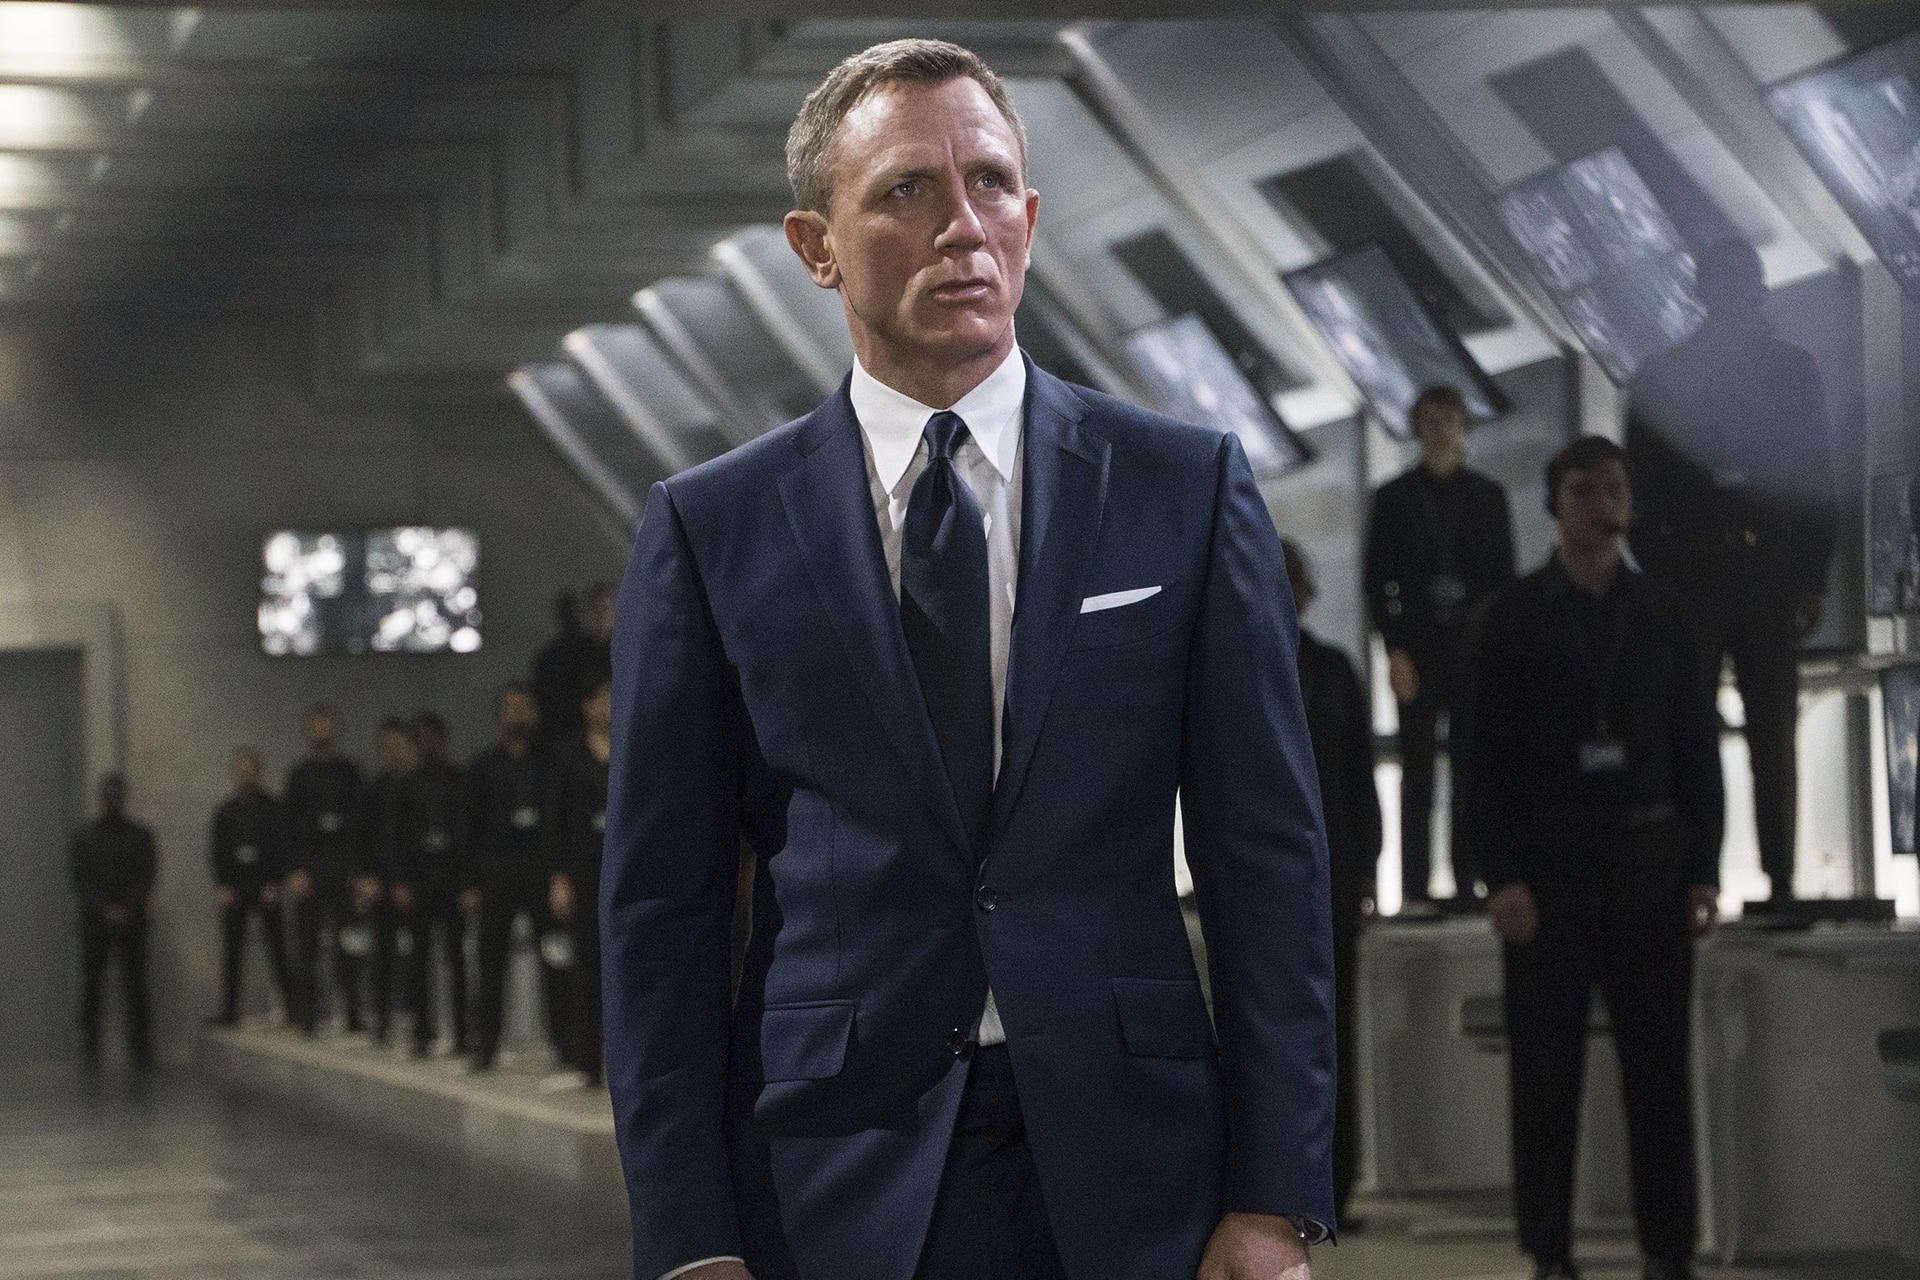 Daniel Craig will be hanging up the James Bond mantle after 'No Time To Die.'